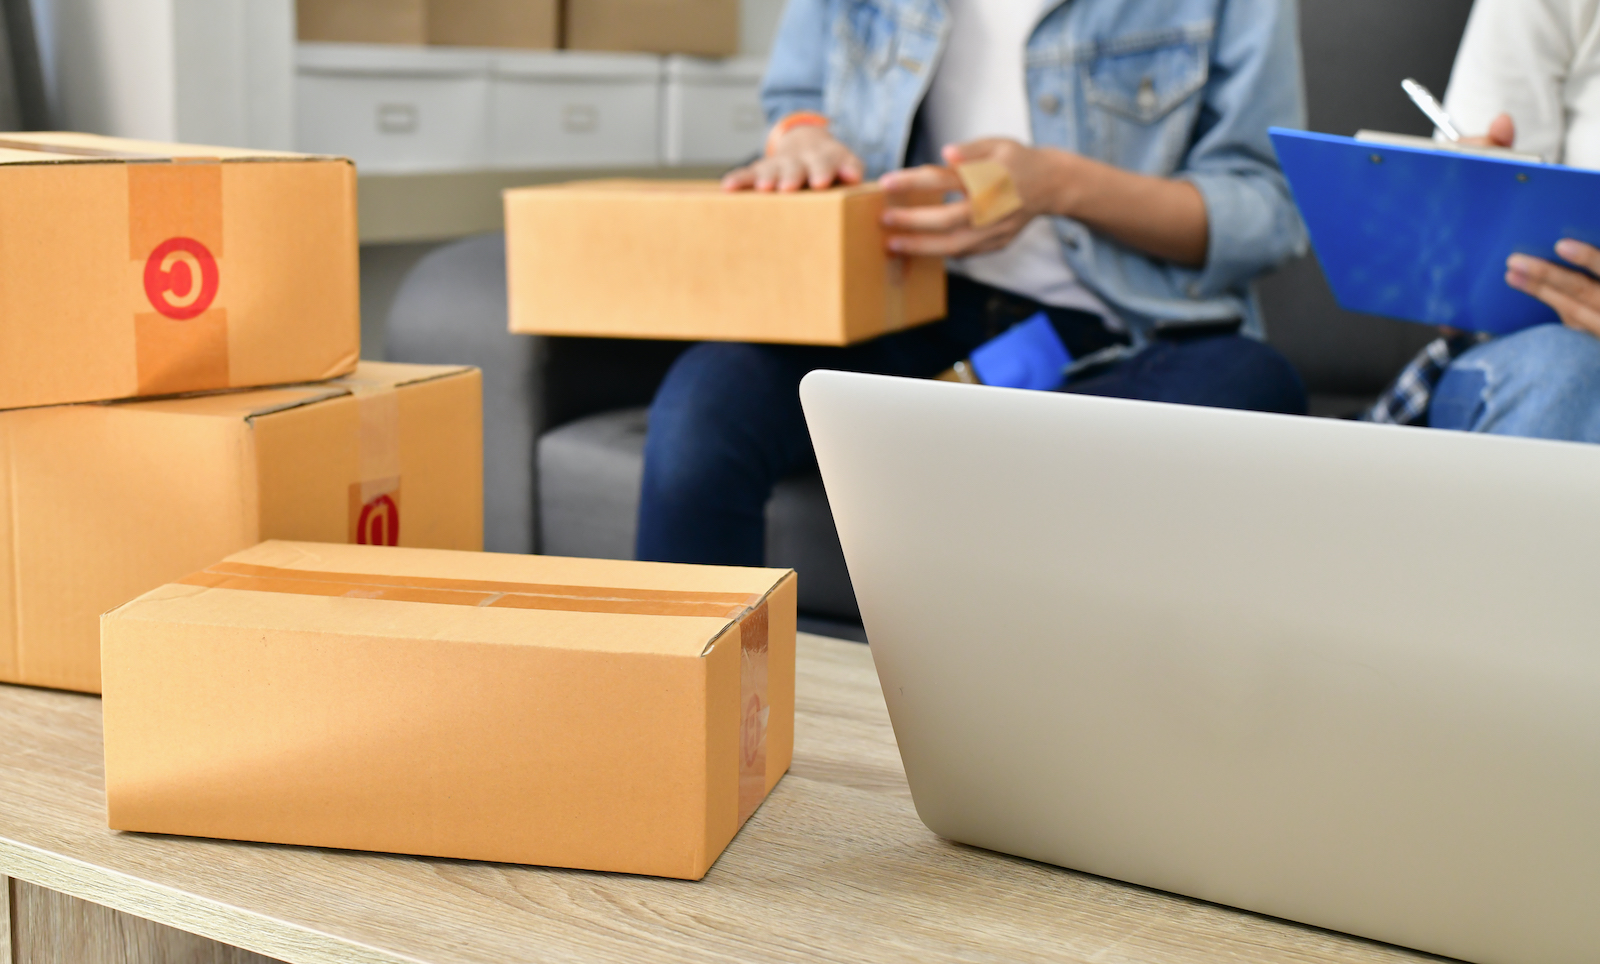 Premium Shipping 101: How to Offer on  and DTC Sites